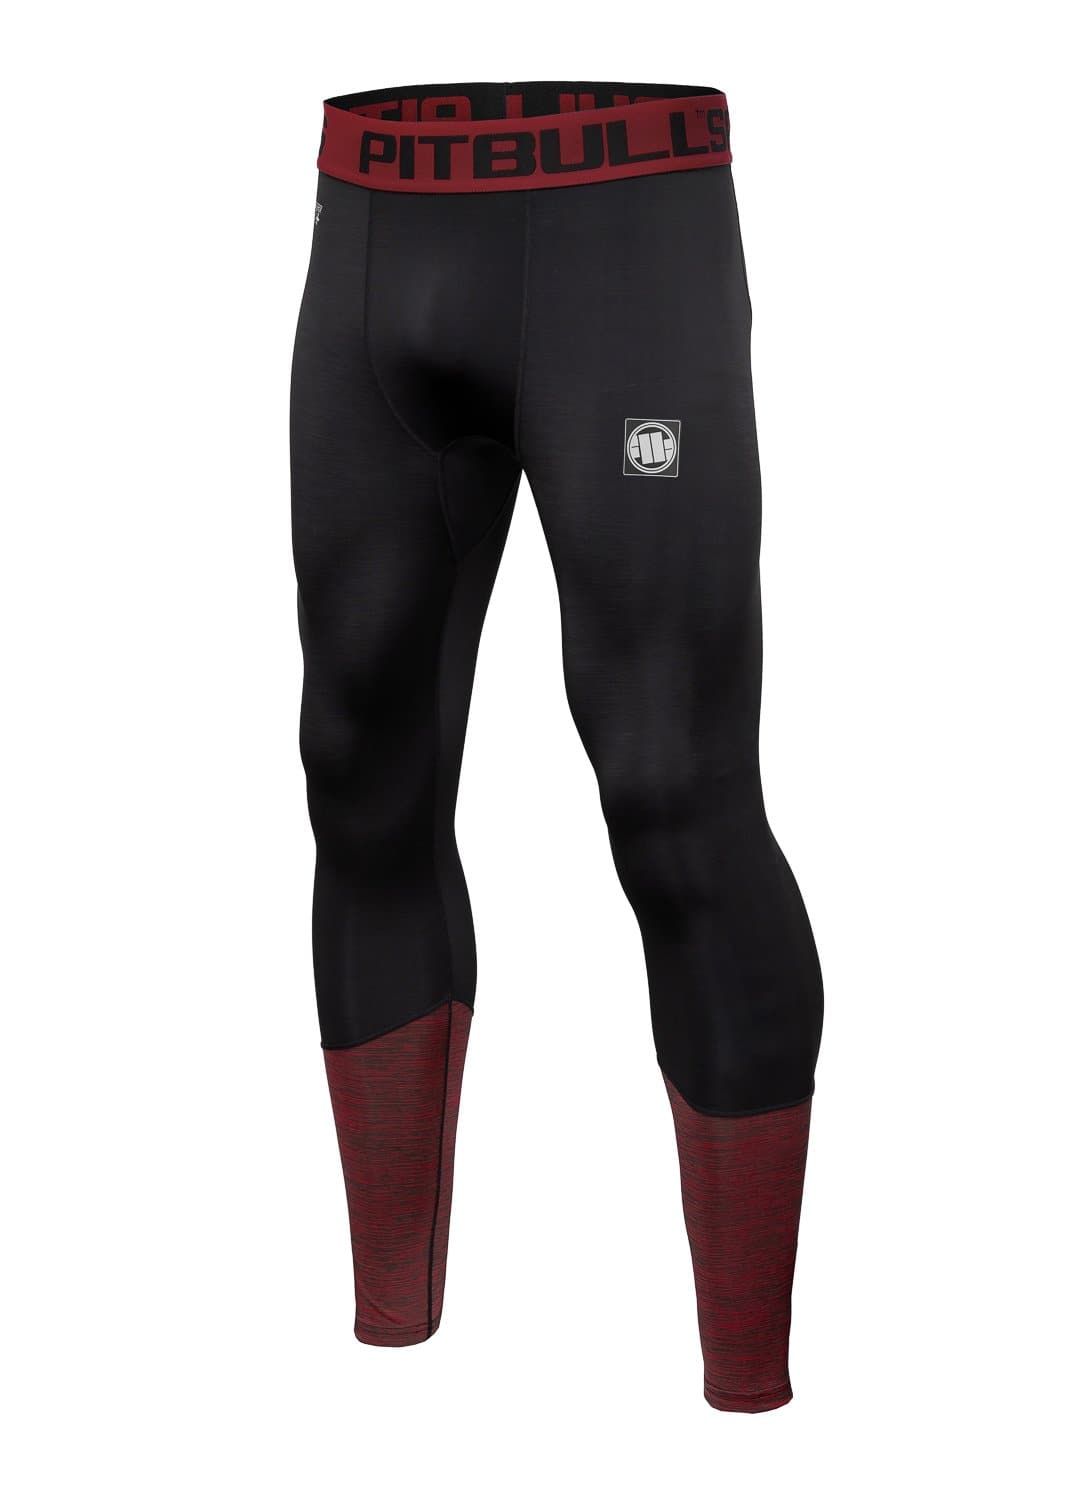 Buy SMALL LOGO Red Compression Pants